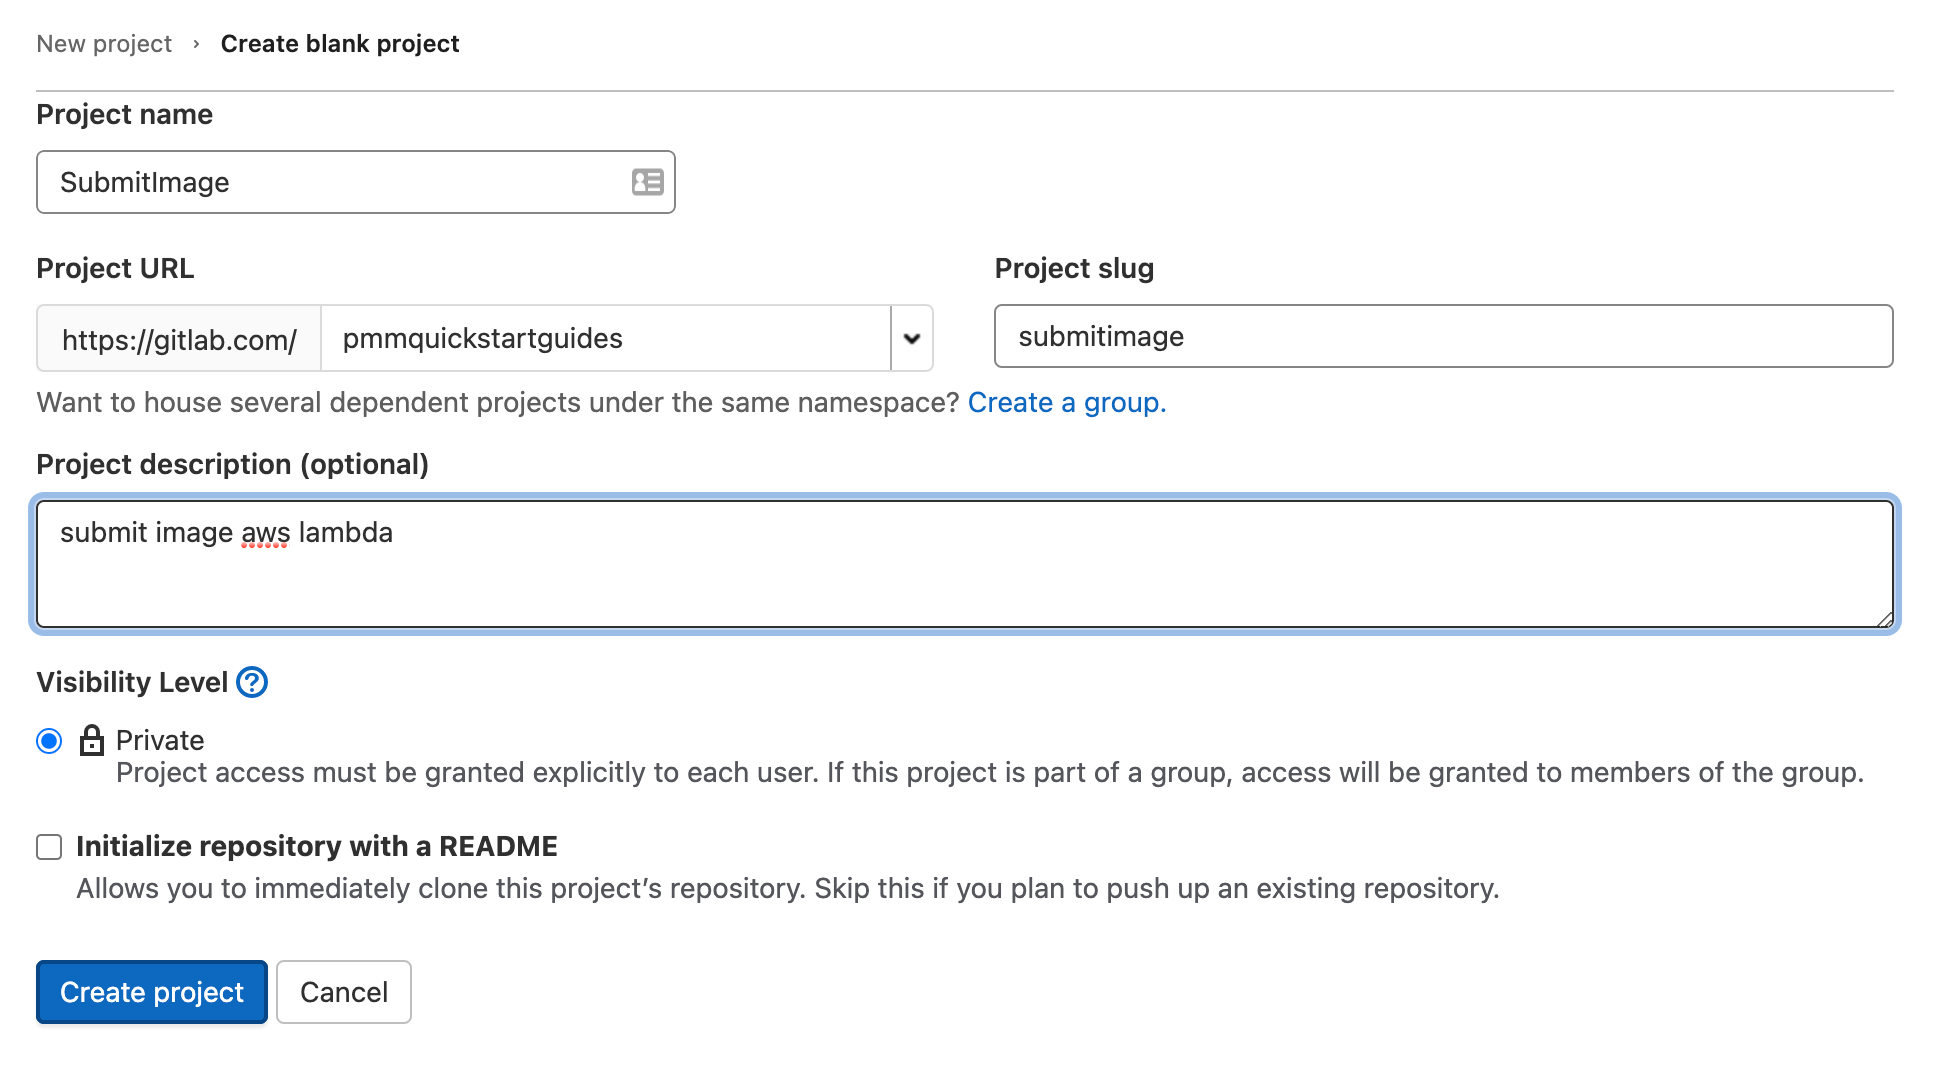 screenshot of creating new project "submitimage" in gitlab